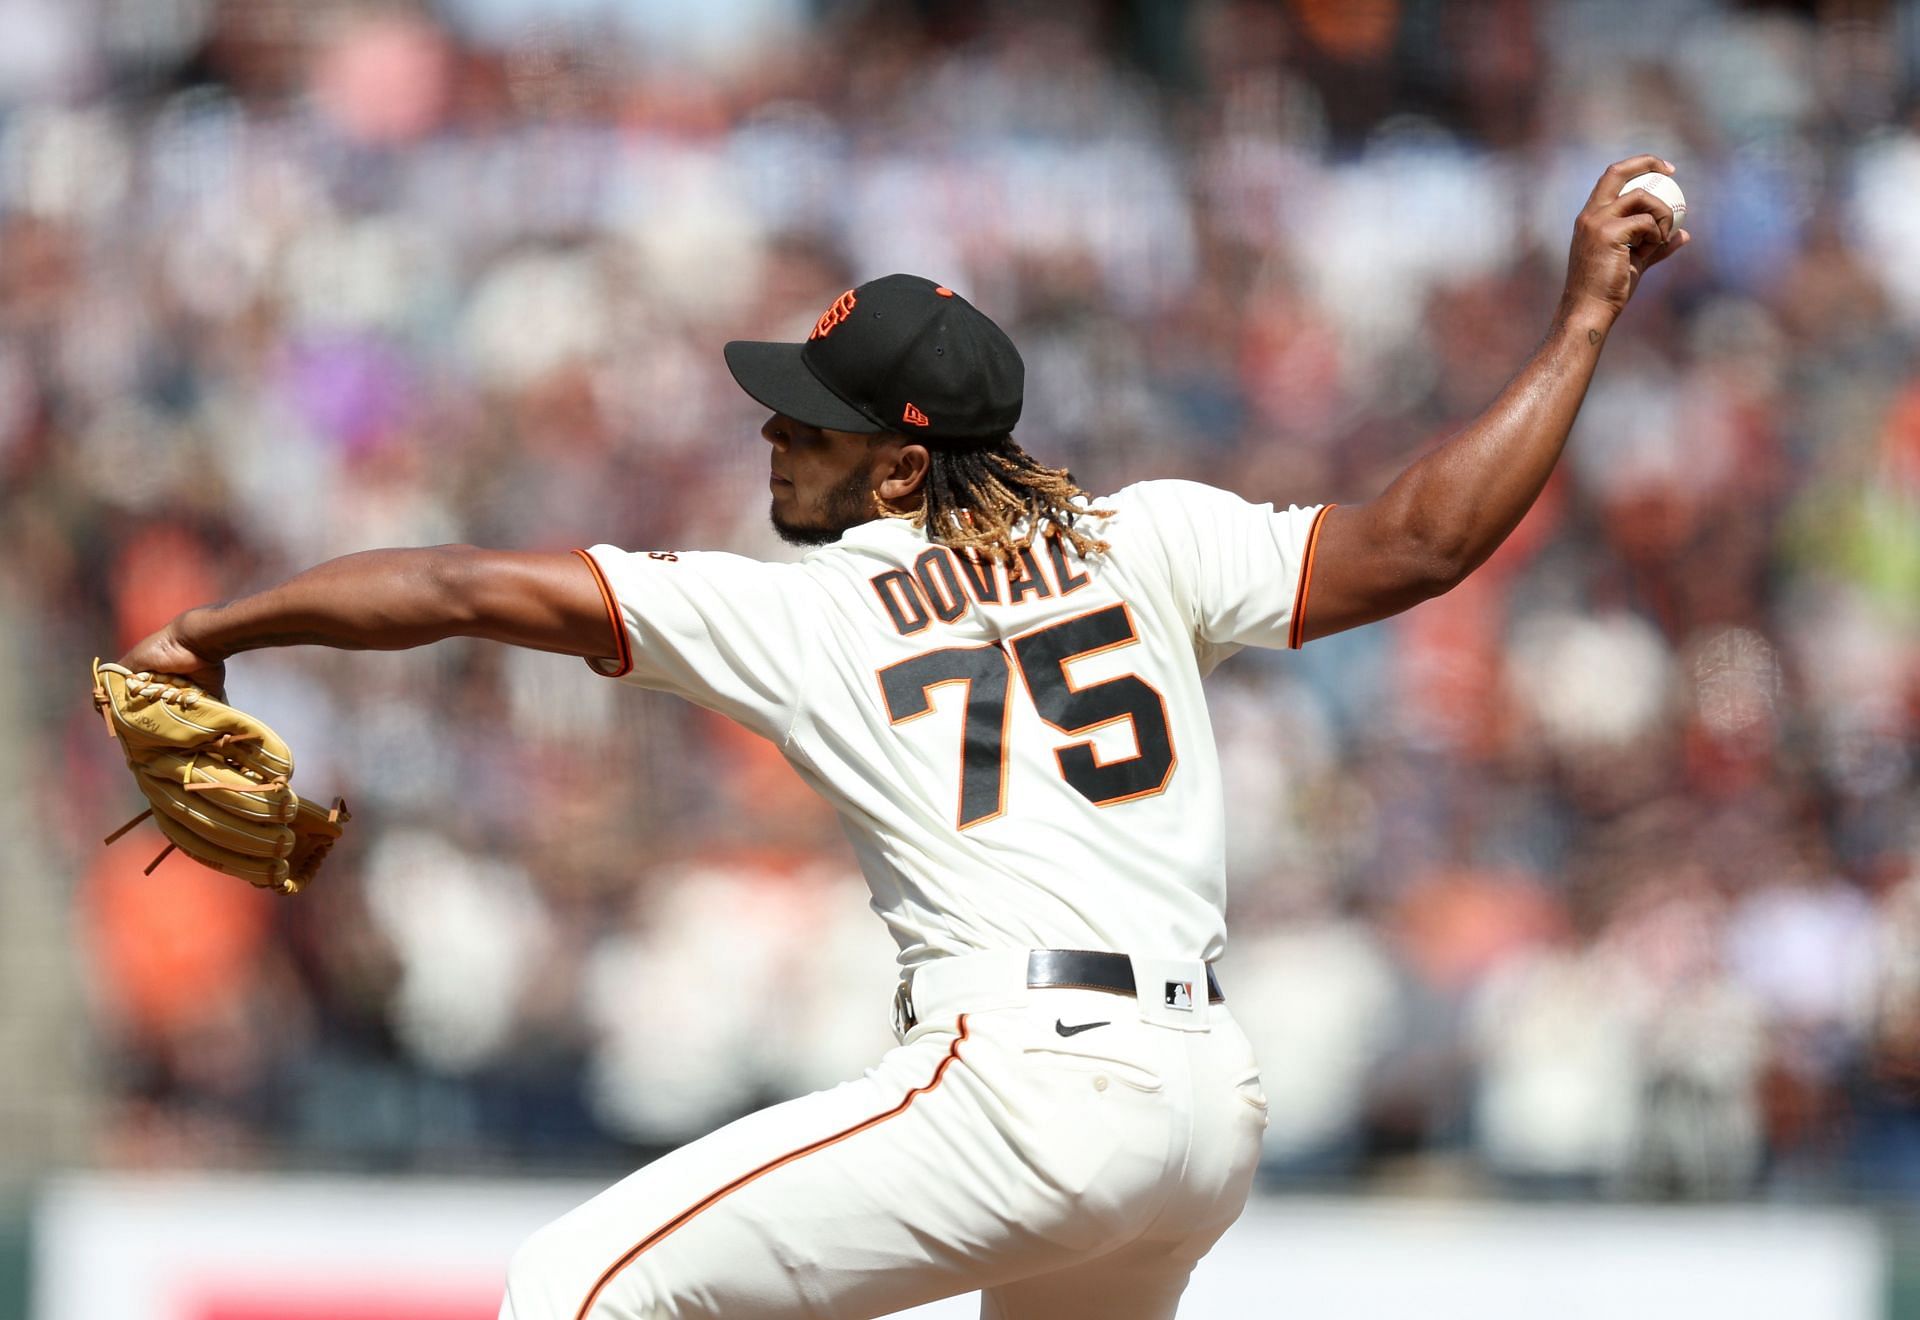 Camilo Doval of the San Francisco Giants pitches against the San Diego Padres